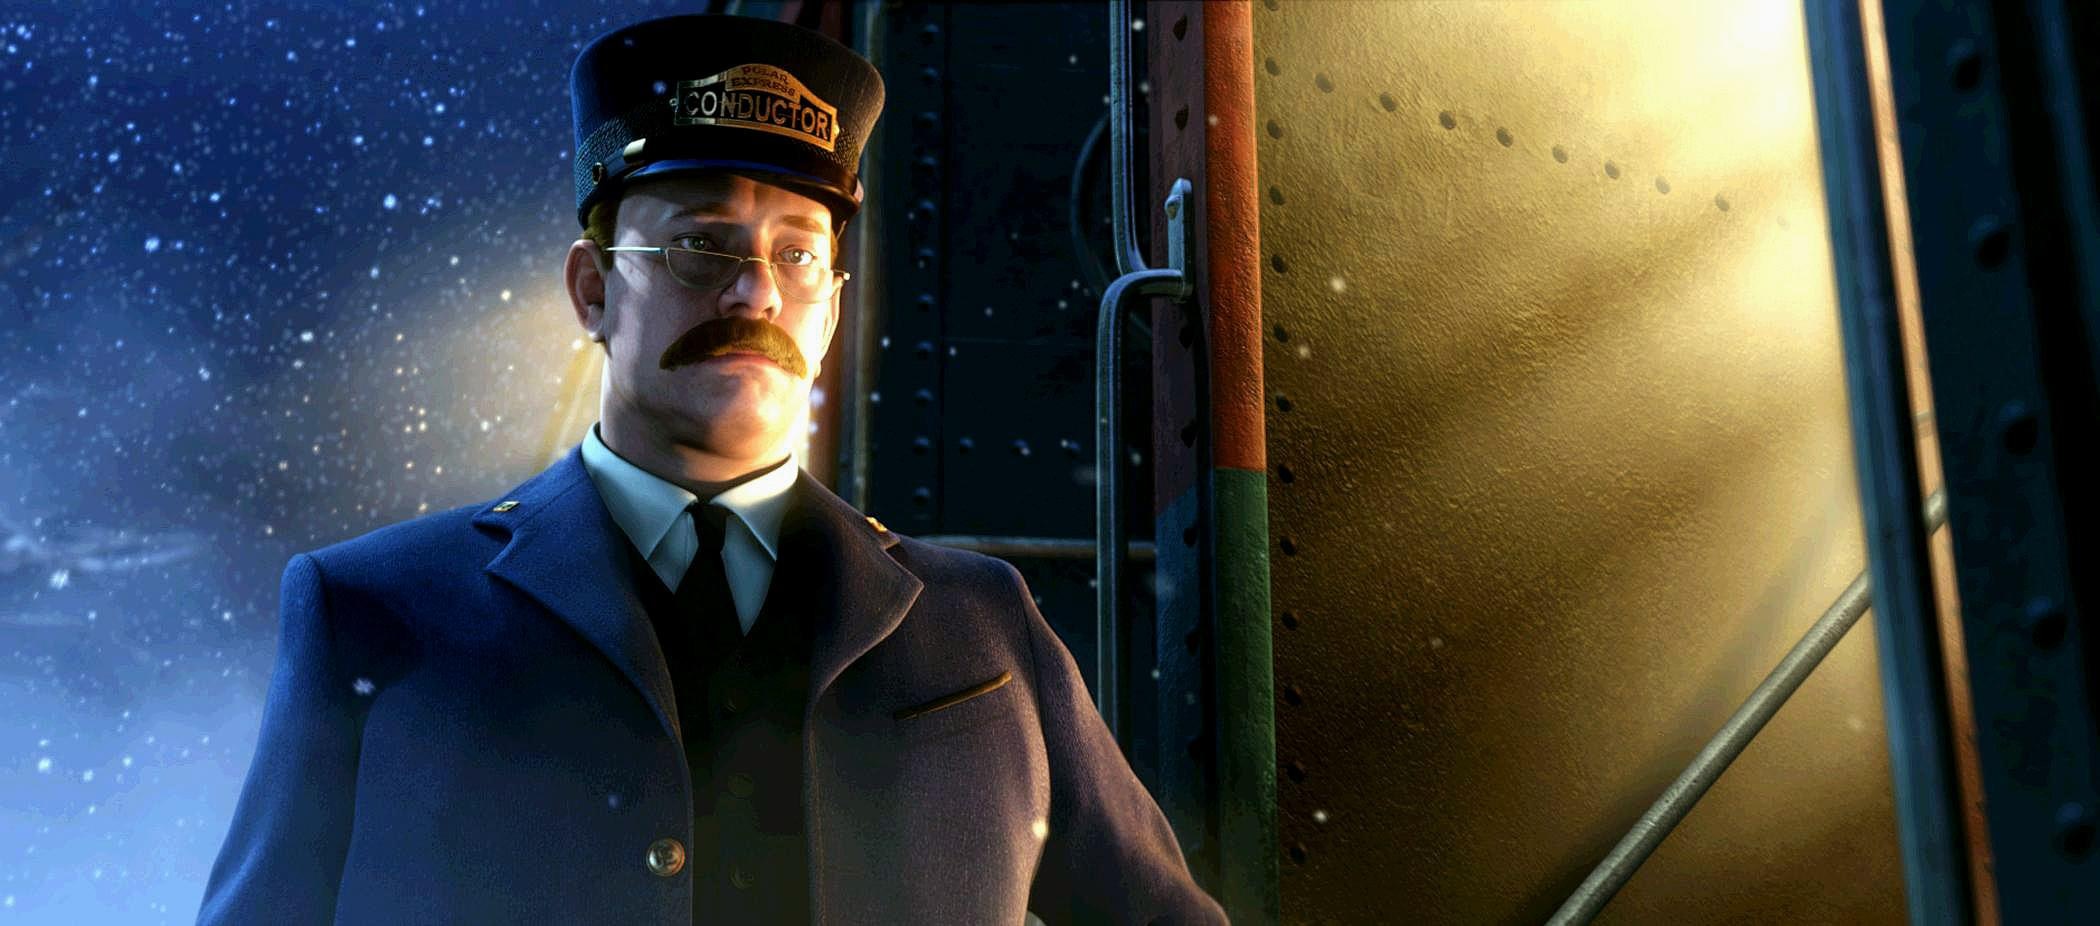 The conductor in The Polar Express looks downward in front of a starry night sky